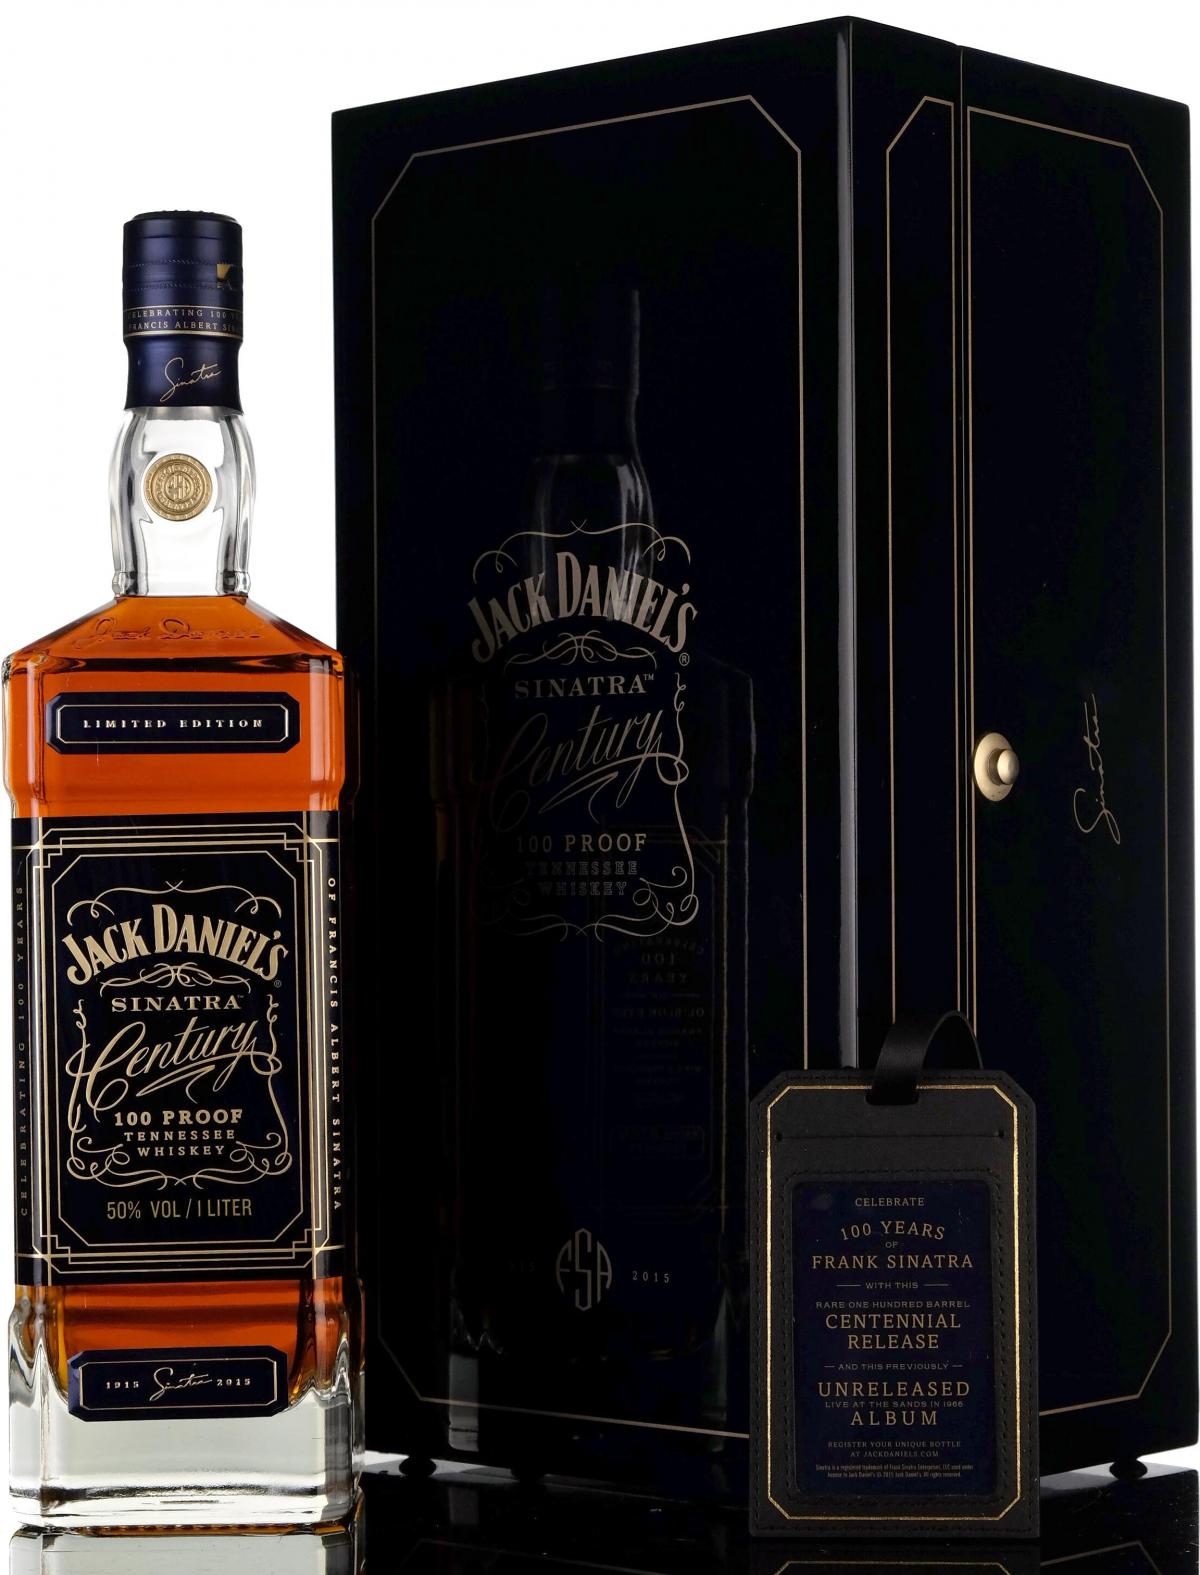 Jack Daniels Sinatra Select - Limited Edition - 2015 Release - 1 Litre